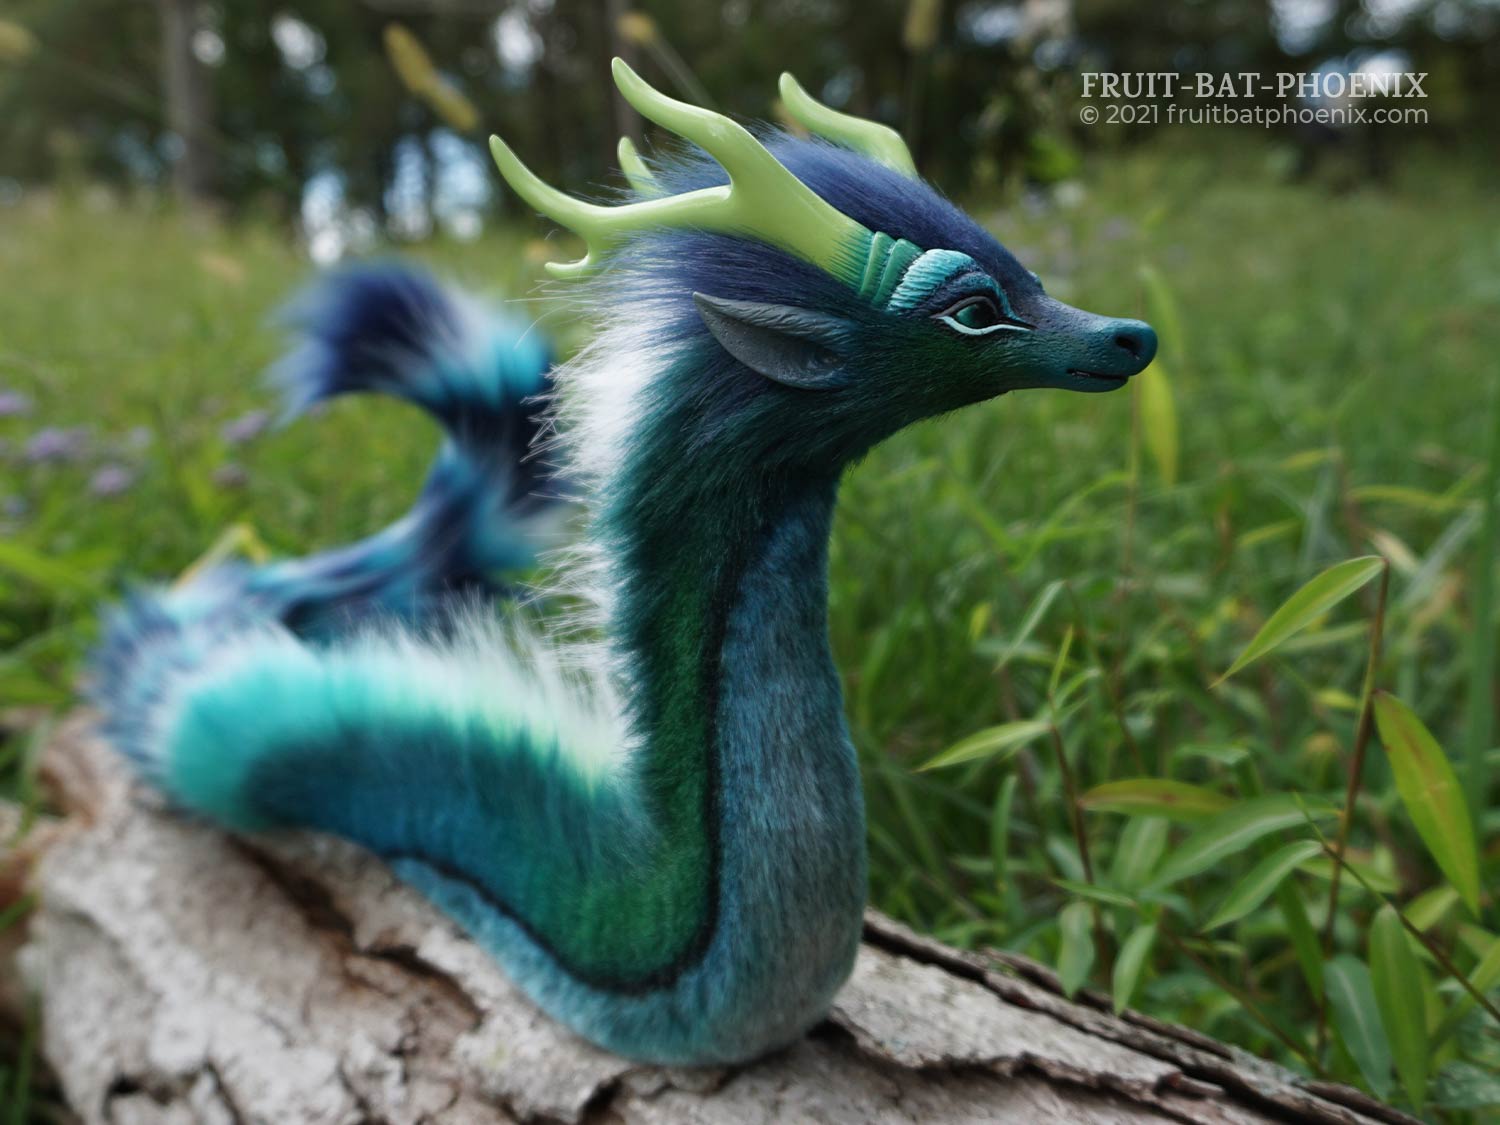 Arora the Noodle Dragon poseable art doll